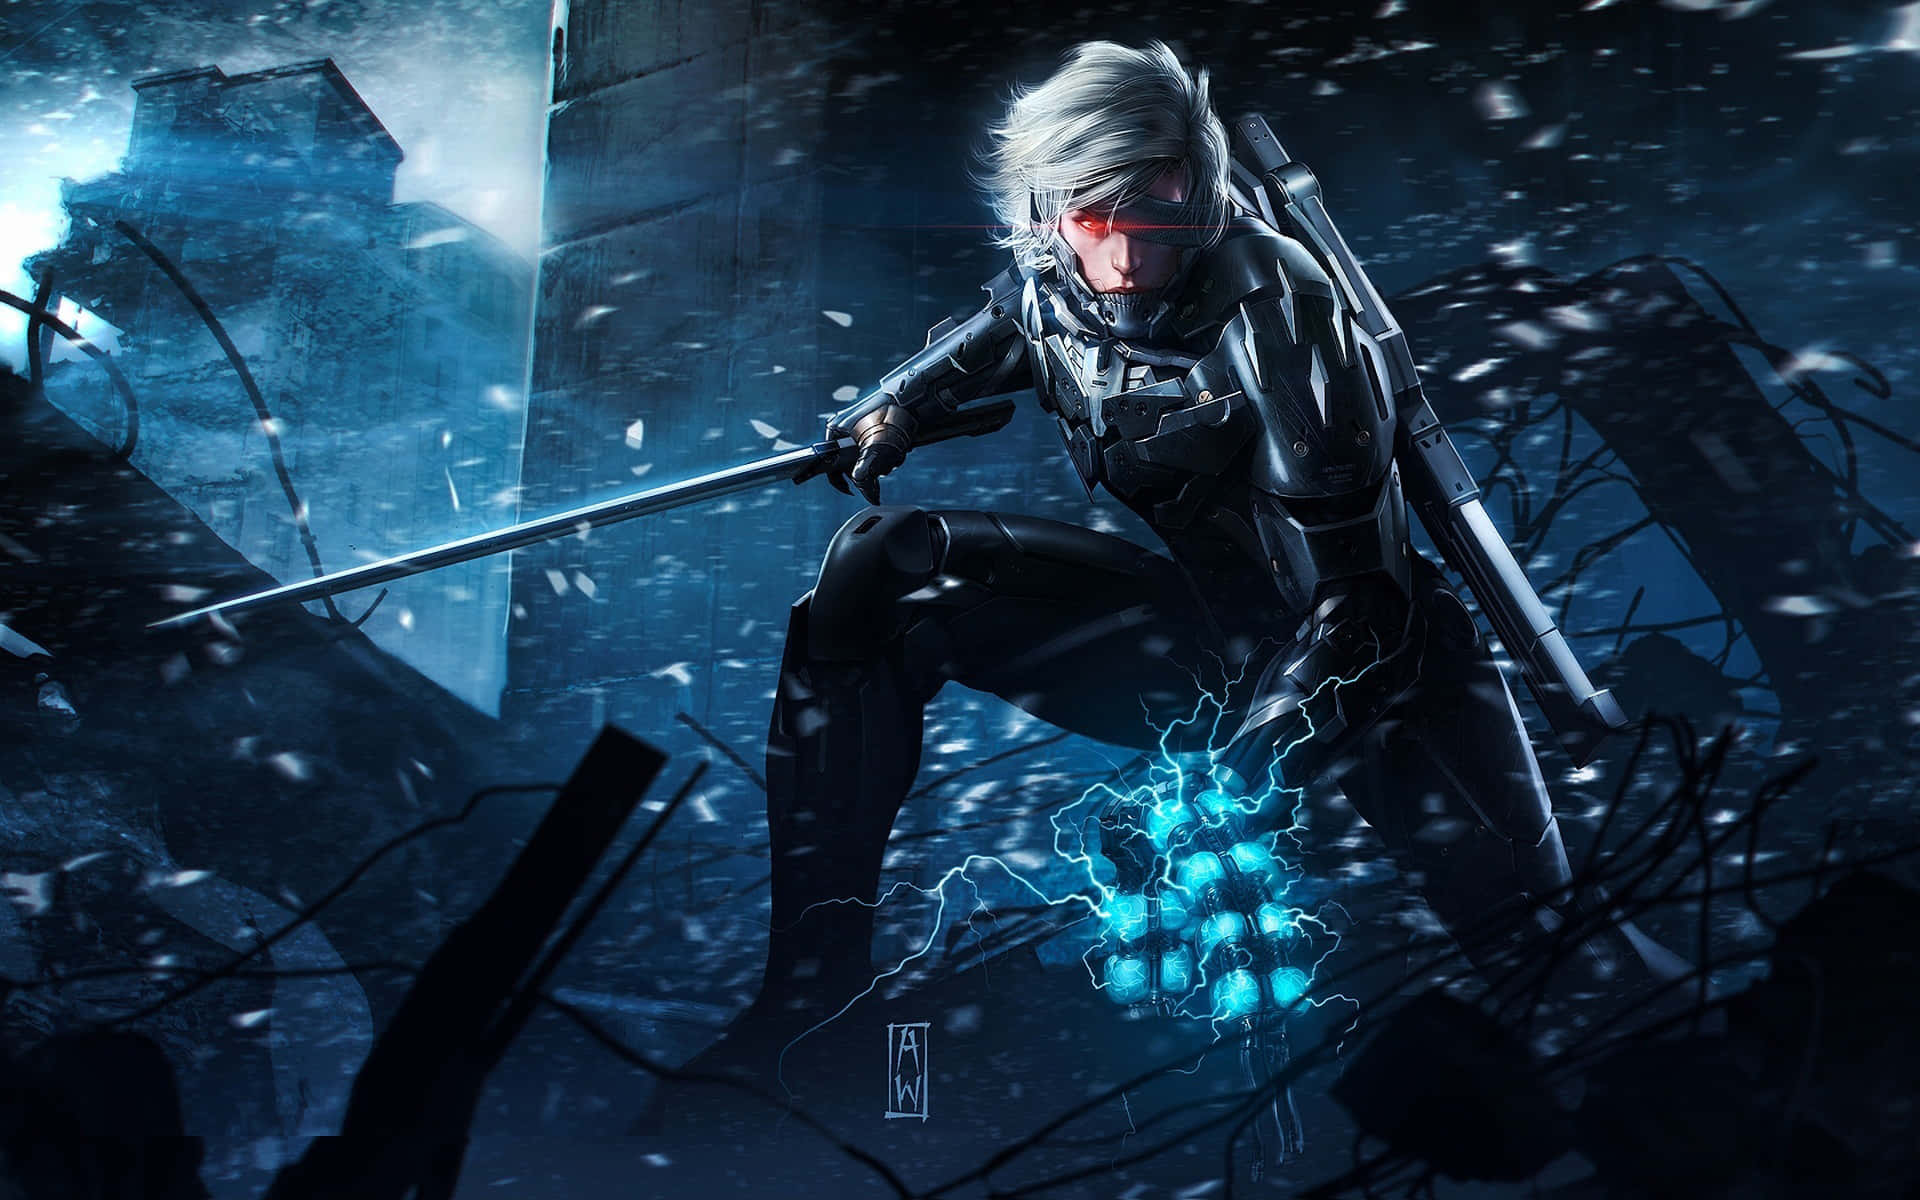 Metal Gear Solid Character In A Dark Environment Background